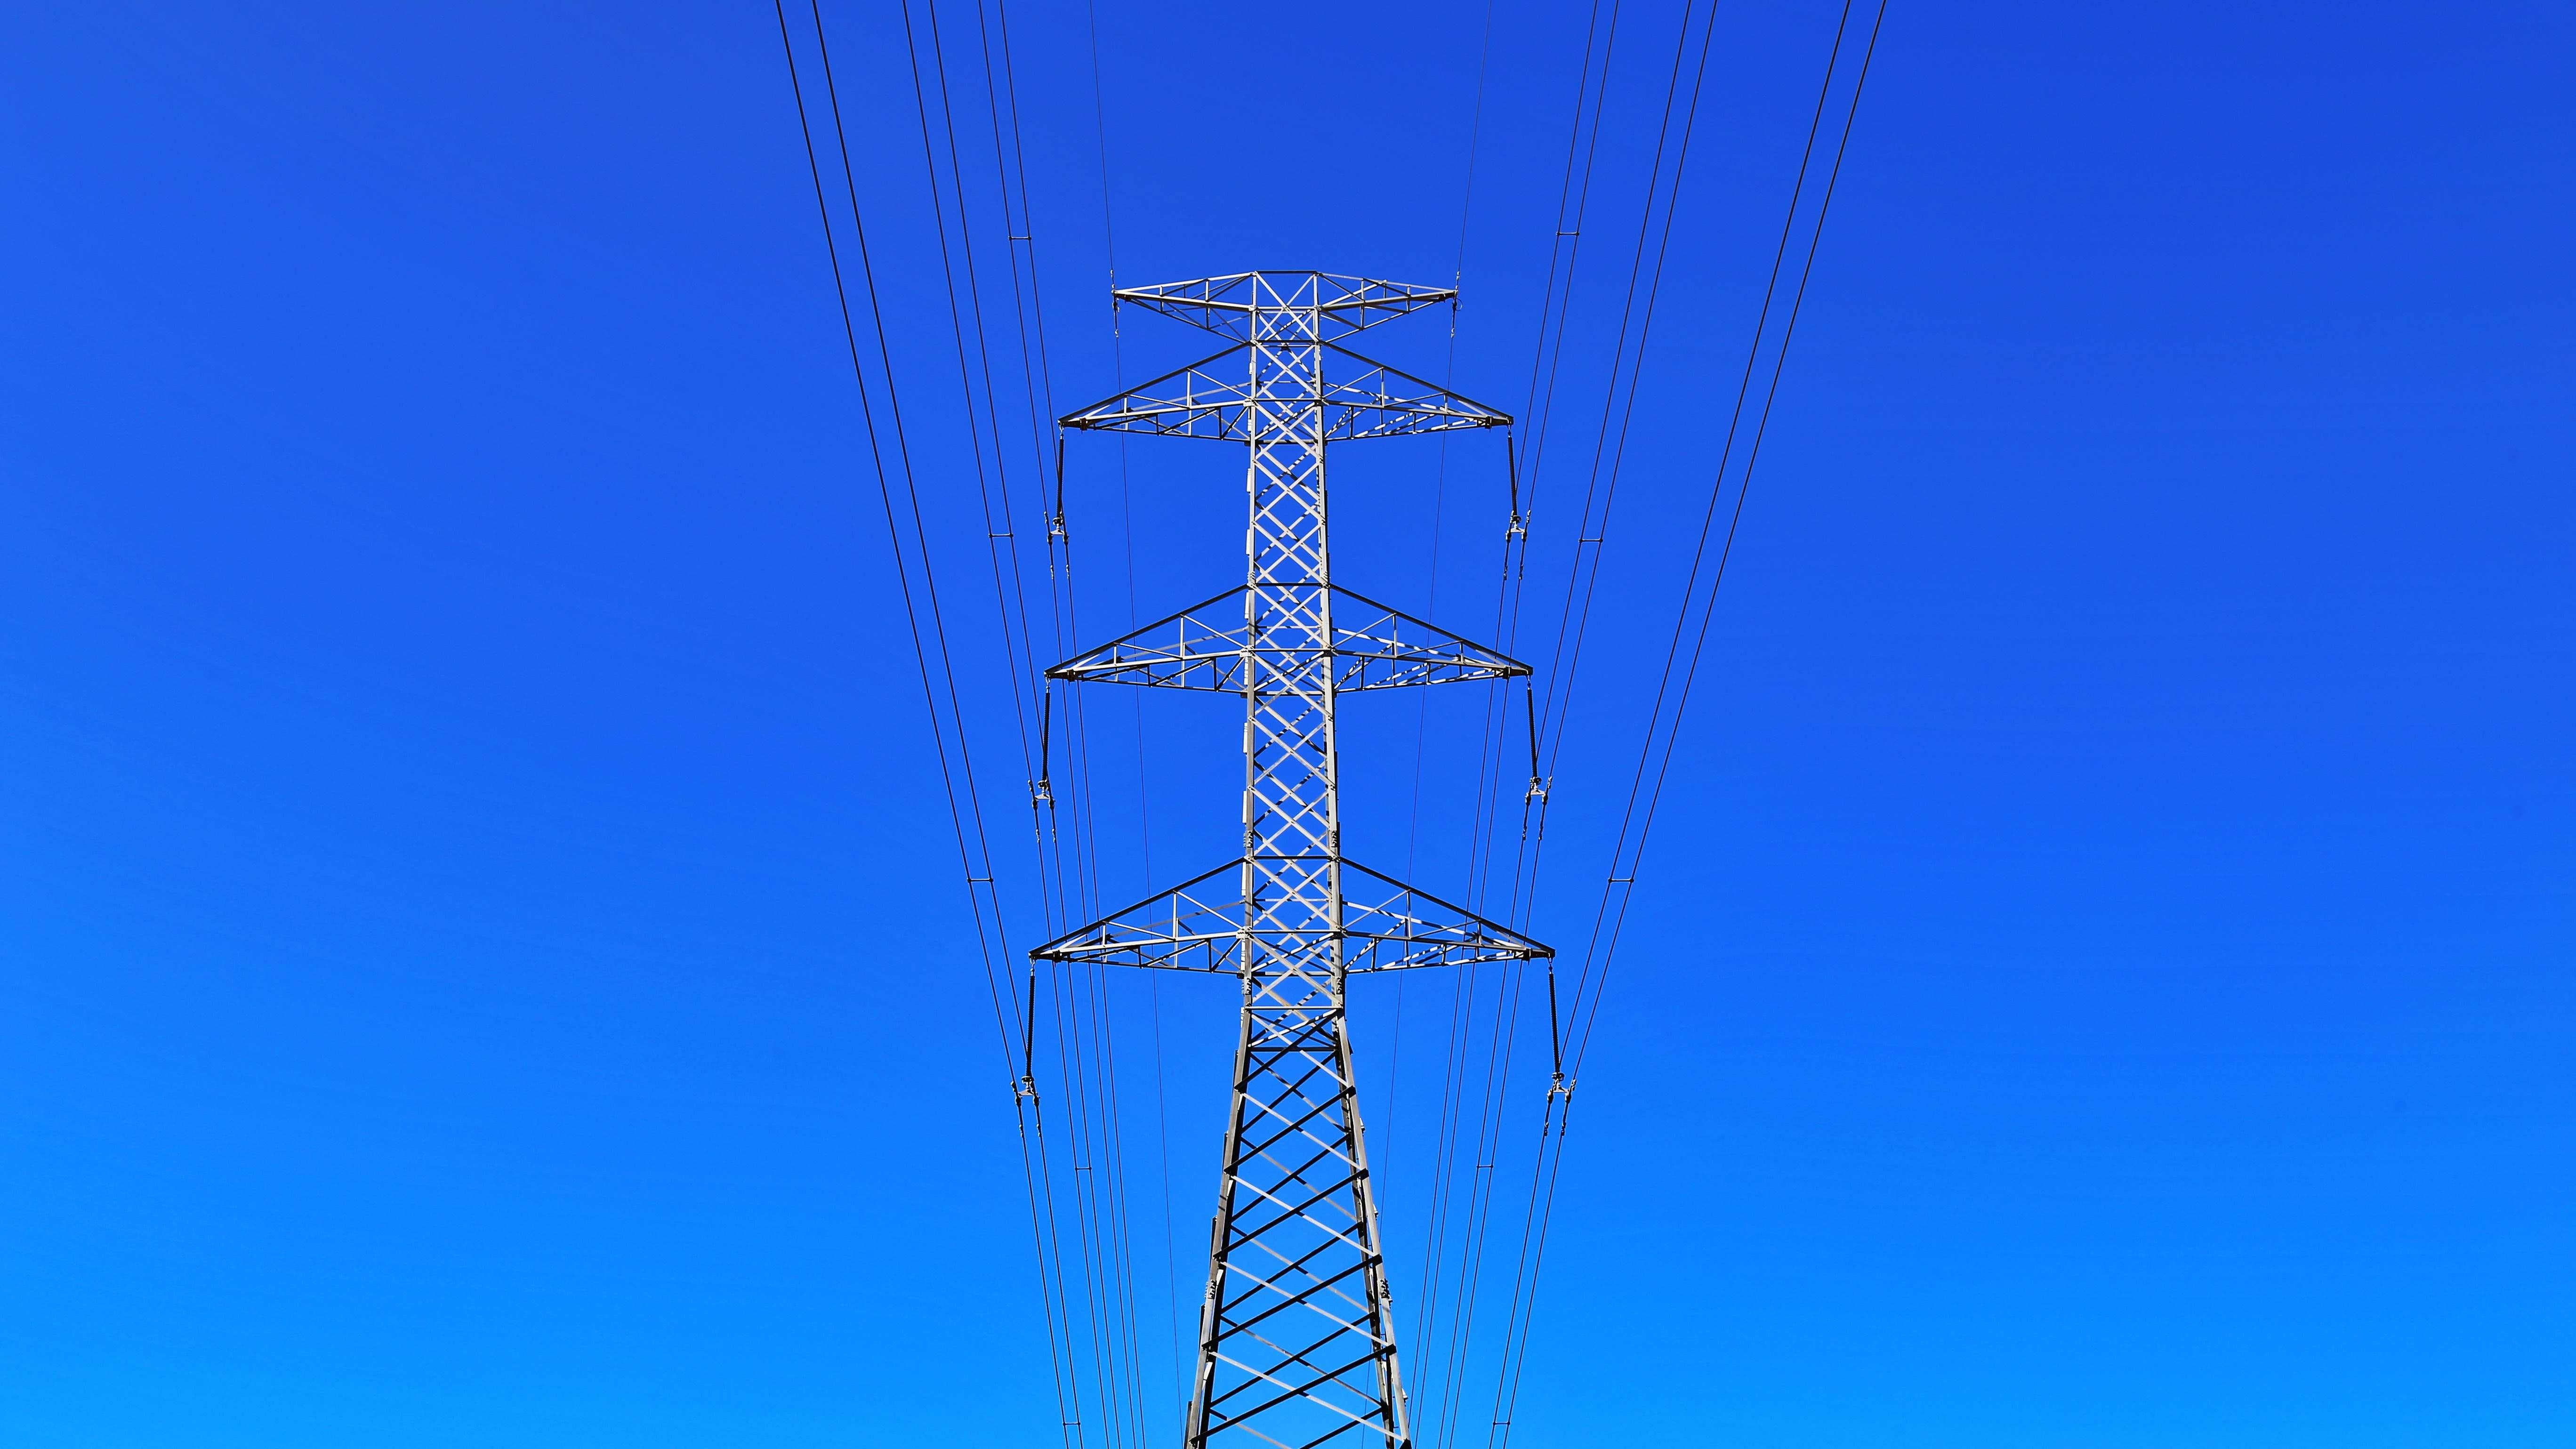 Sumitomo to supply transmission equipment for 122MW wind farm in Japan